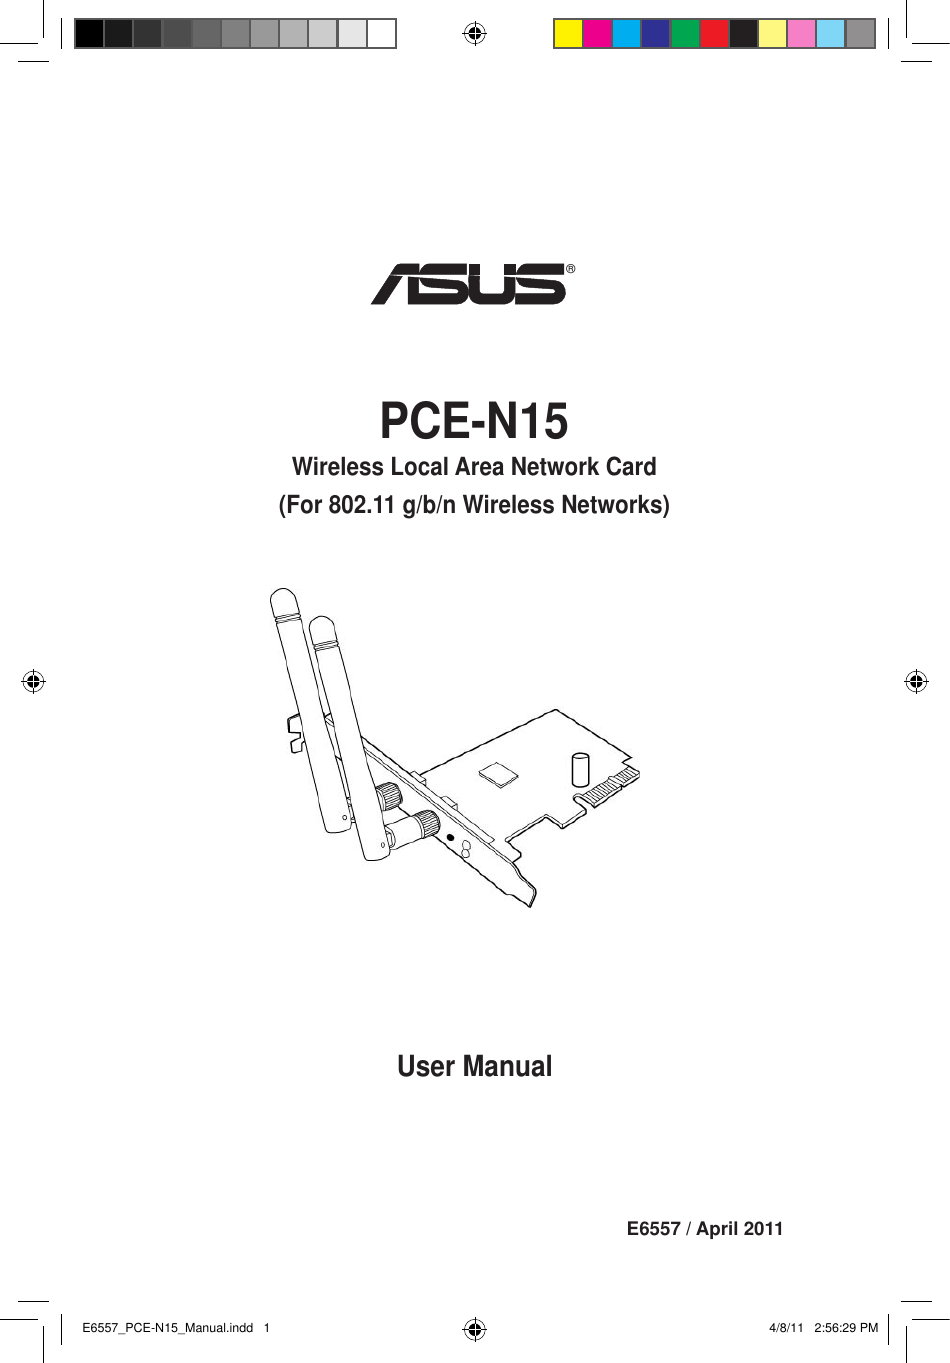 User ManualE6557 / April 2011PCE-N15 Wireless Local Area Network Card (For 802.11 g/b/n Wireless Networks)®E6557_PCE-N15_Manual.indd   1 4/8/11   2:56:29 PM